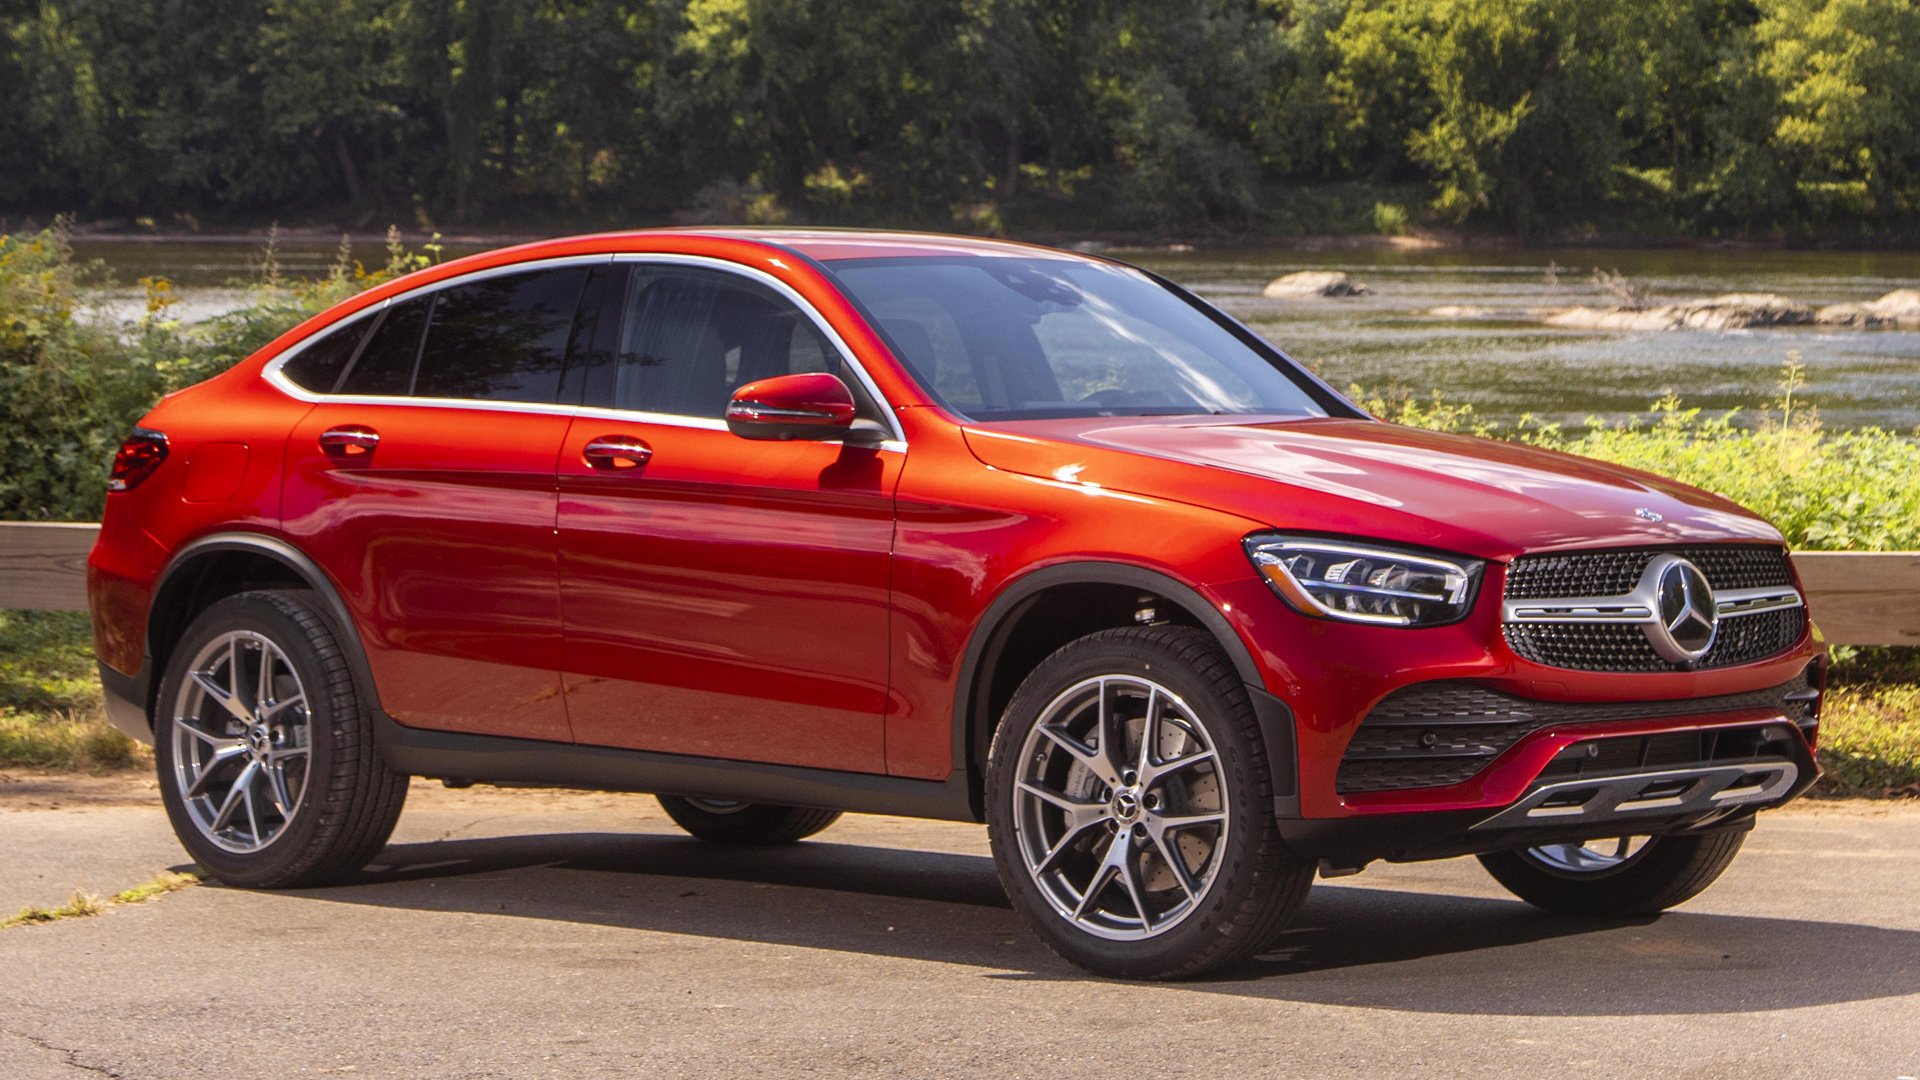 2020 Mercedes-Benz Glc300 Coupe Wallpapers